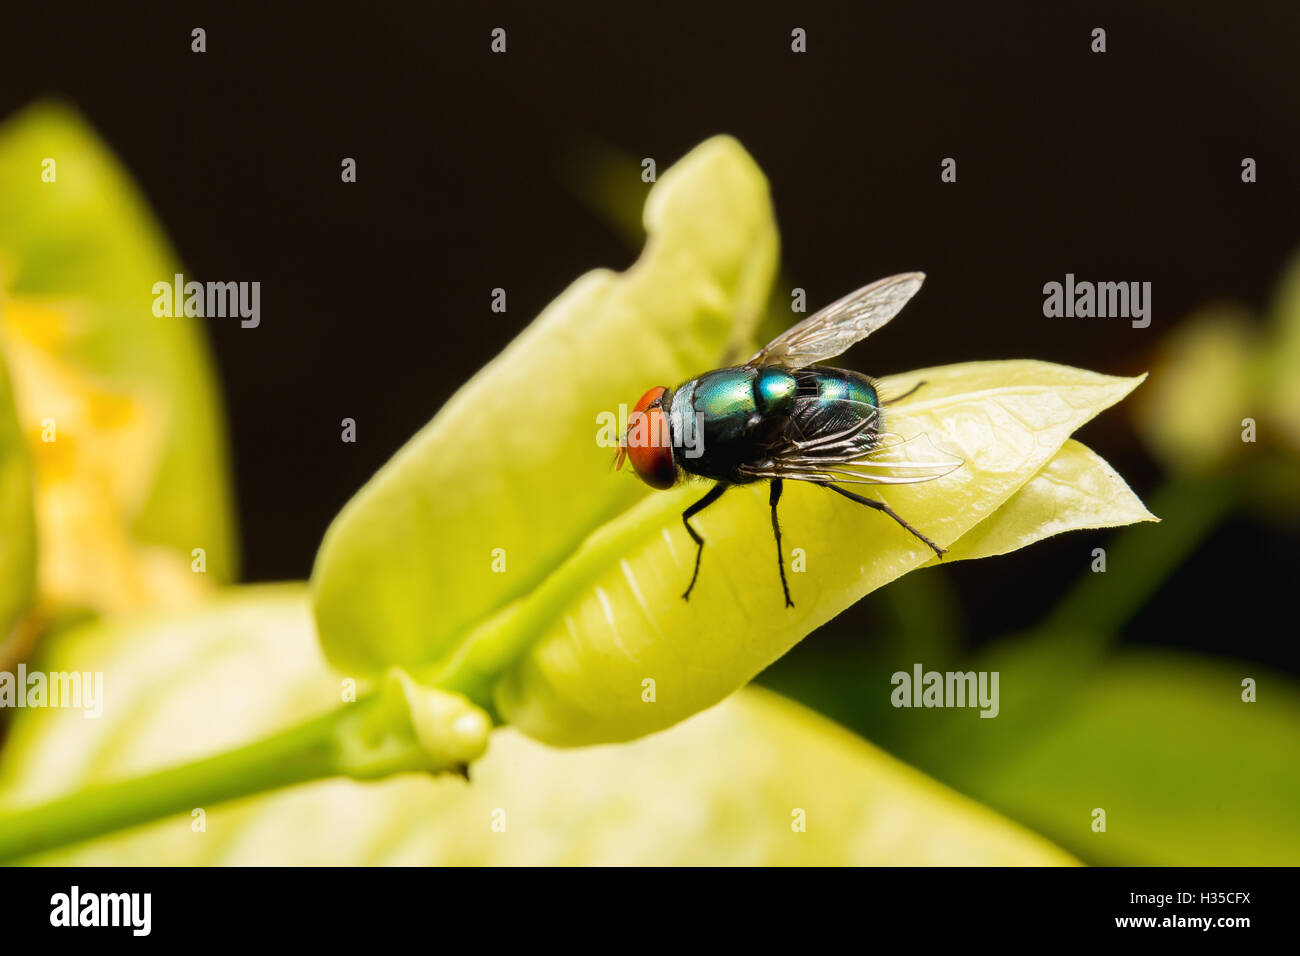 Nature image showing details of insect life: closeup / macro of a calliphoridae fly (blow-fly, bluebottle, greenbottle) sitting  Stock Photo